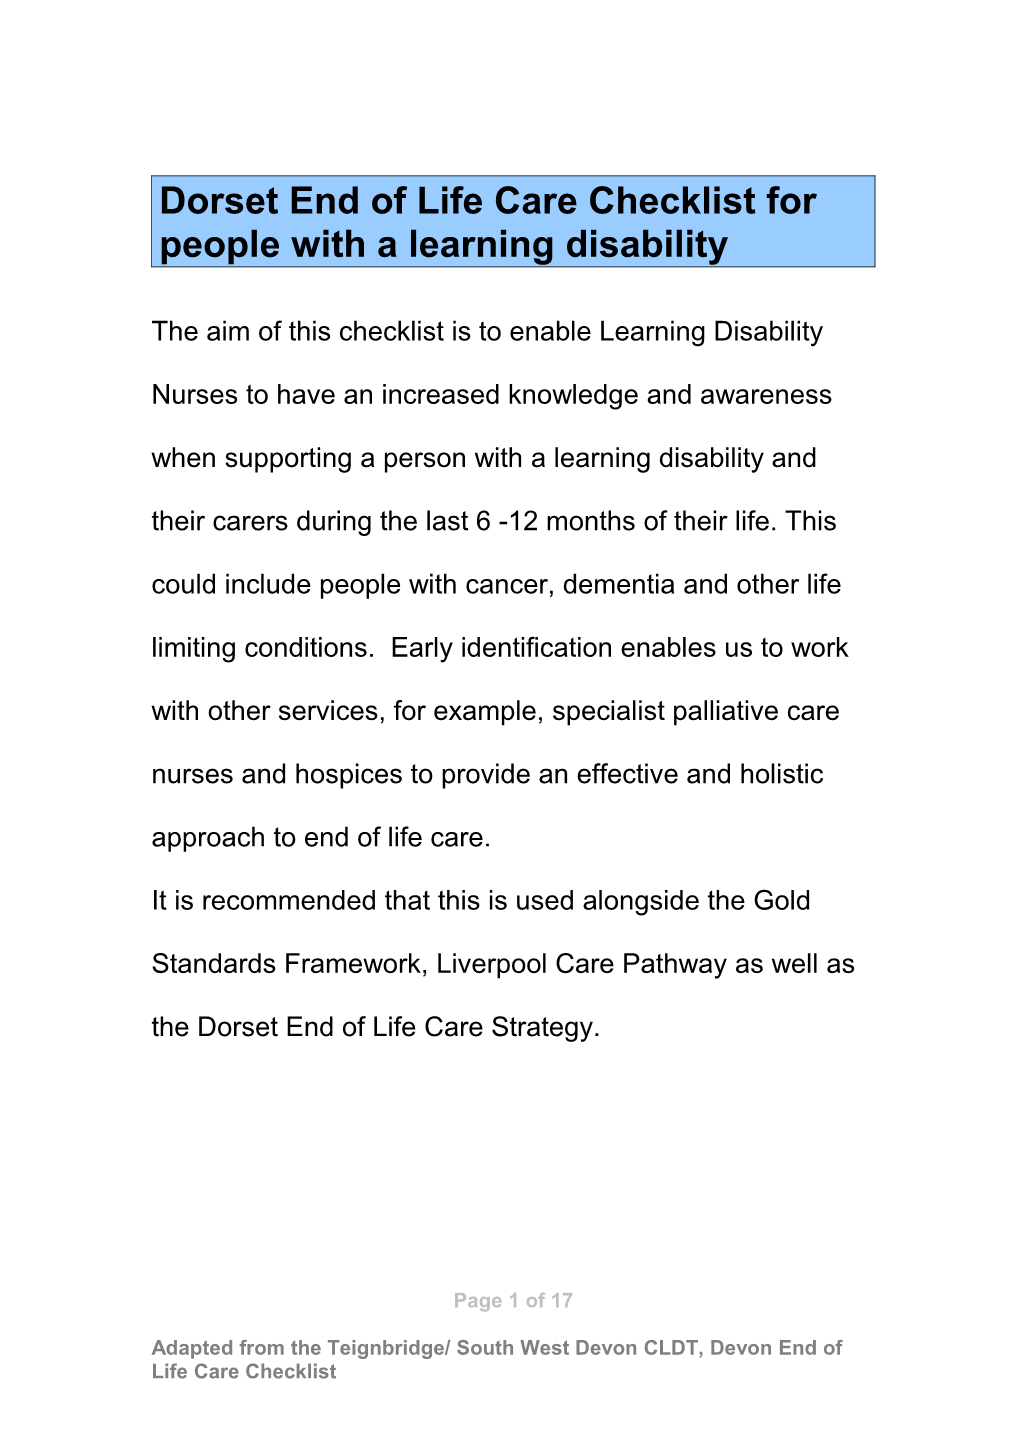 Dorset End of Life Care Checklist for People with a Learning Disability